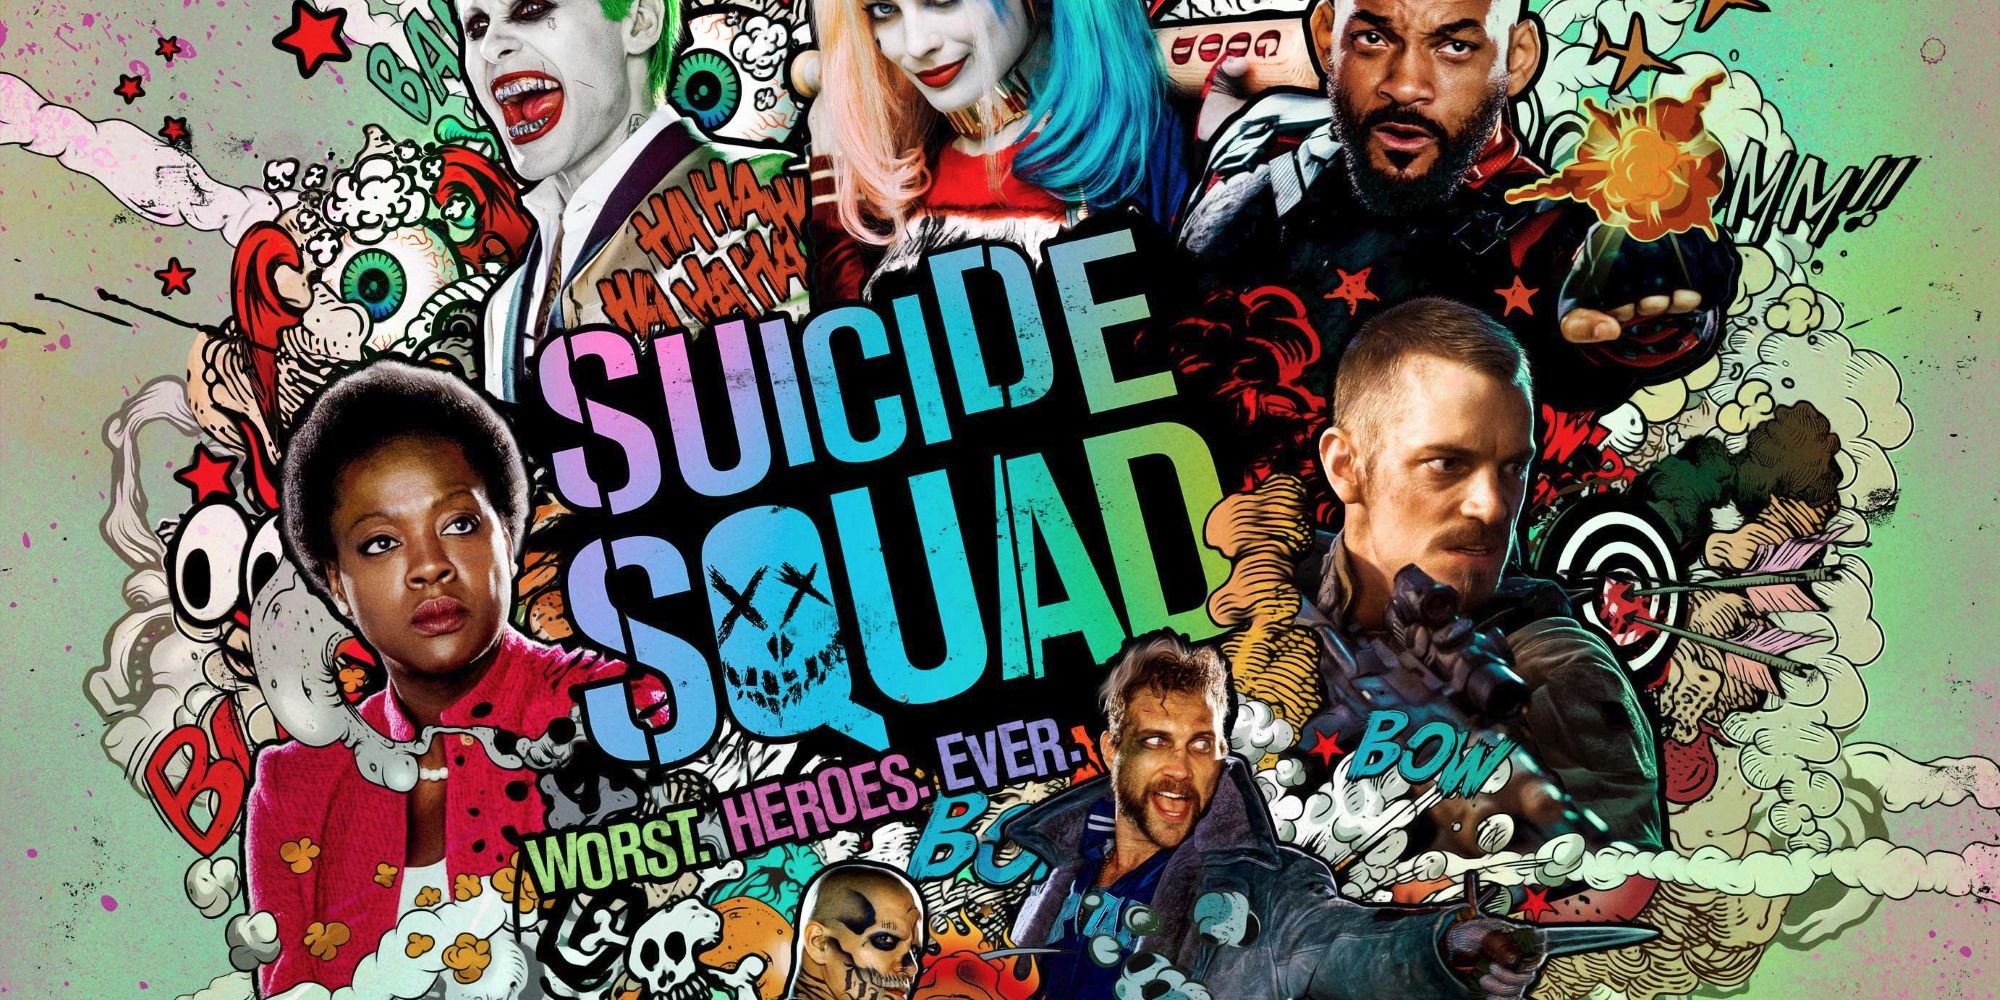 [Rumor] Rocksteady (Arkham Knight) is developing Suicide Squad video game while WB Montreal (Arkham Origins) is developing Batman: Gotham Knights